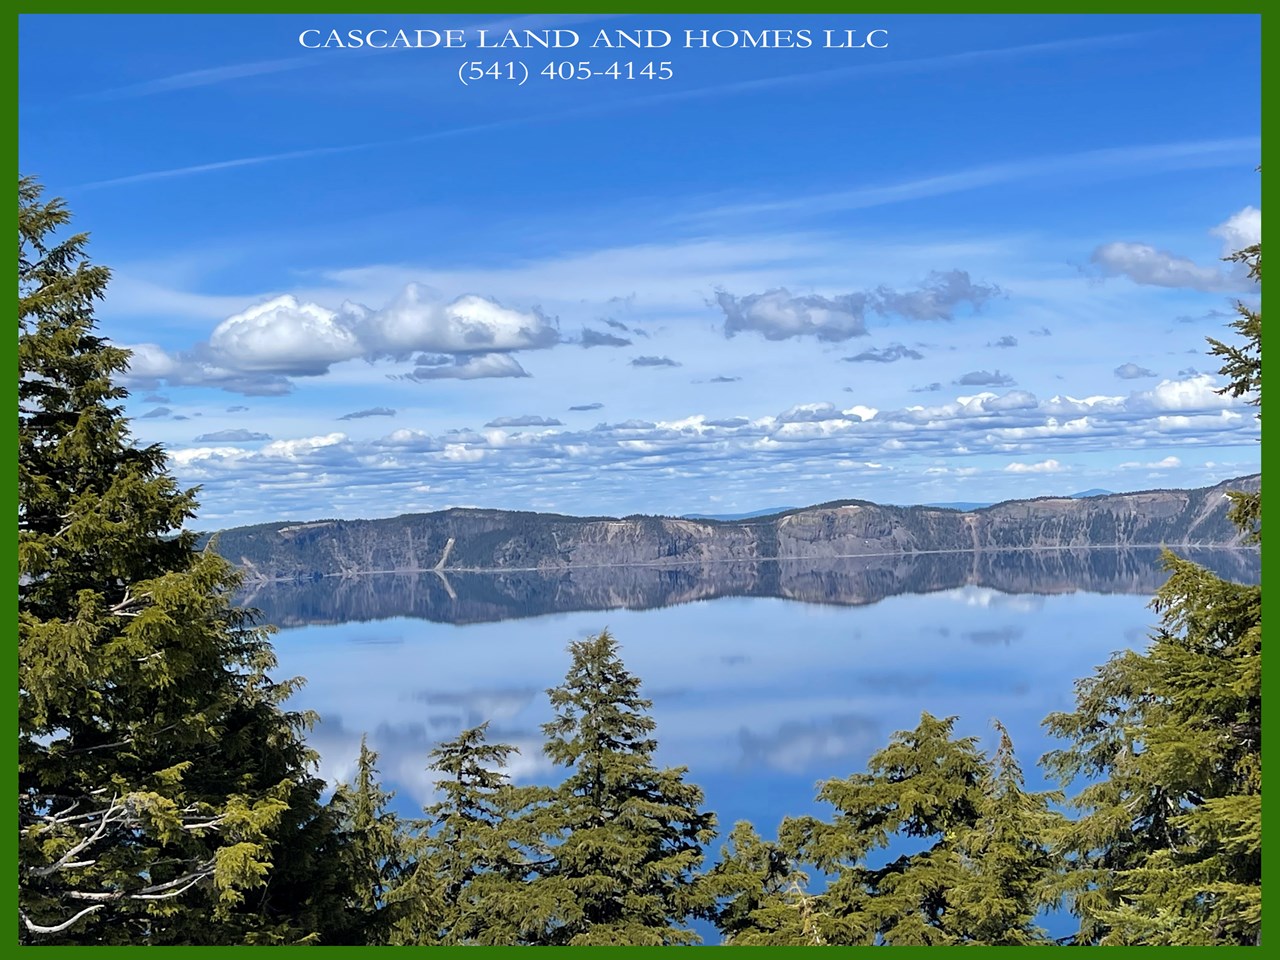 the property is only about 45 minutes away from crater lake national park! crater lake is the deepest lake in the nation and is crystal clear. there are many hiking trails and so much to see at the park.